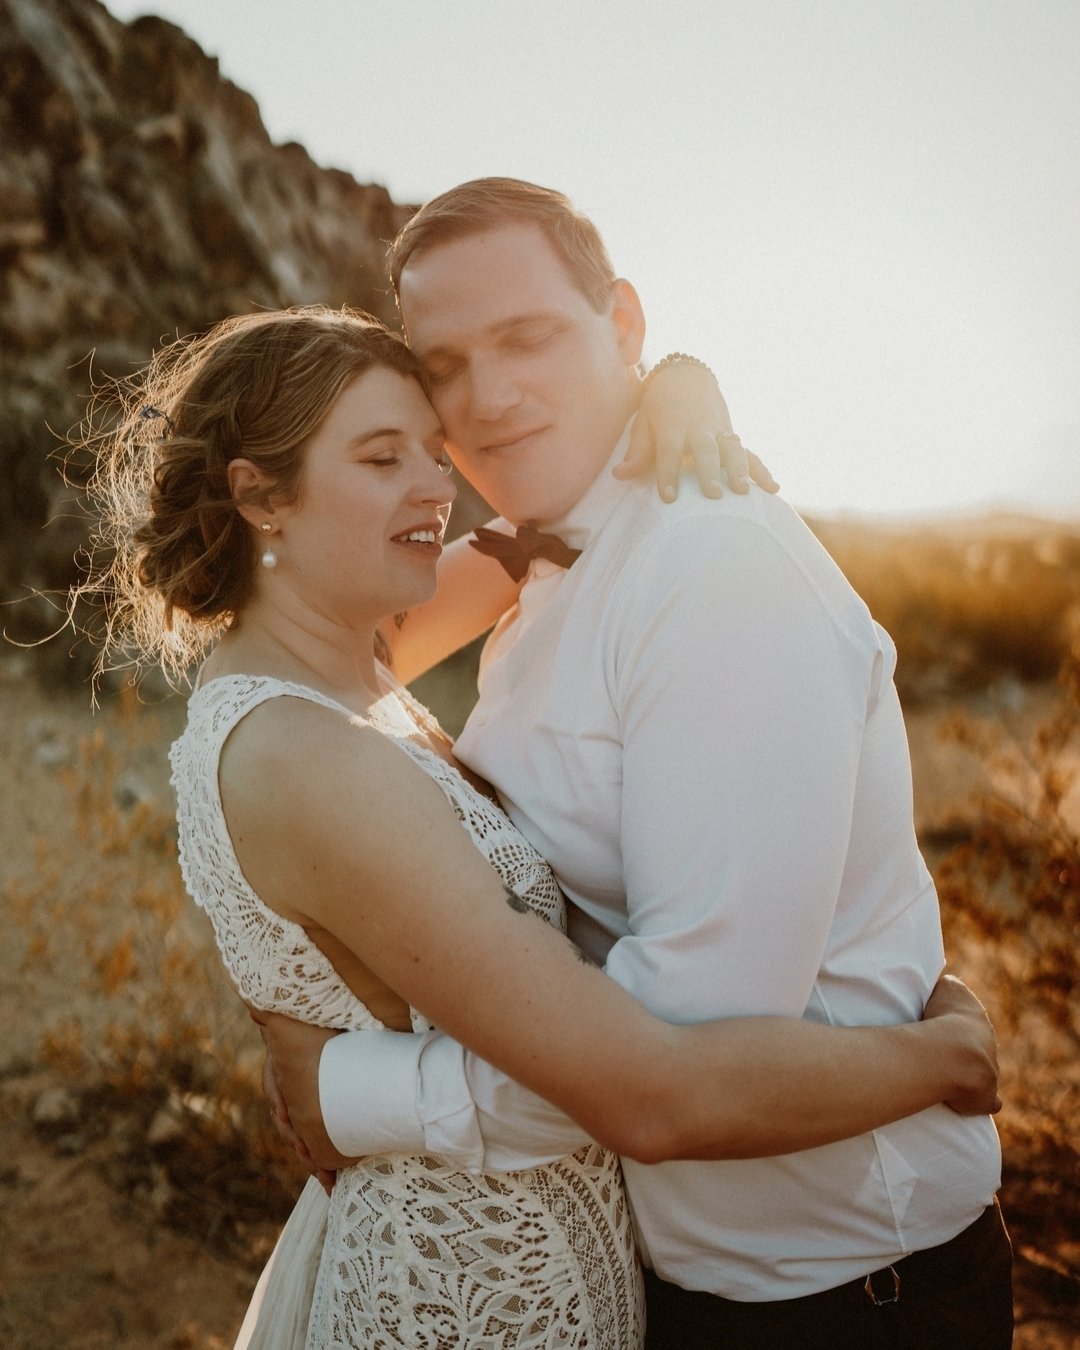 That light and that hug!
&bull;⁠ The Creative Team &bull;⁠
Awesome Couple: @mar_mah_lade + Steven
Marlayna's Attire: @grace_loves_lace
Steven&rsquo;s Attire: @suitsupply
Venue: @moradajoshuatree
Florist + Planner: @paloverdeparties
Photographer: @jen